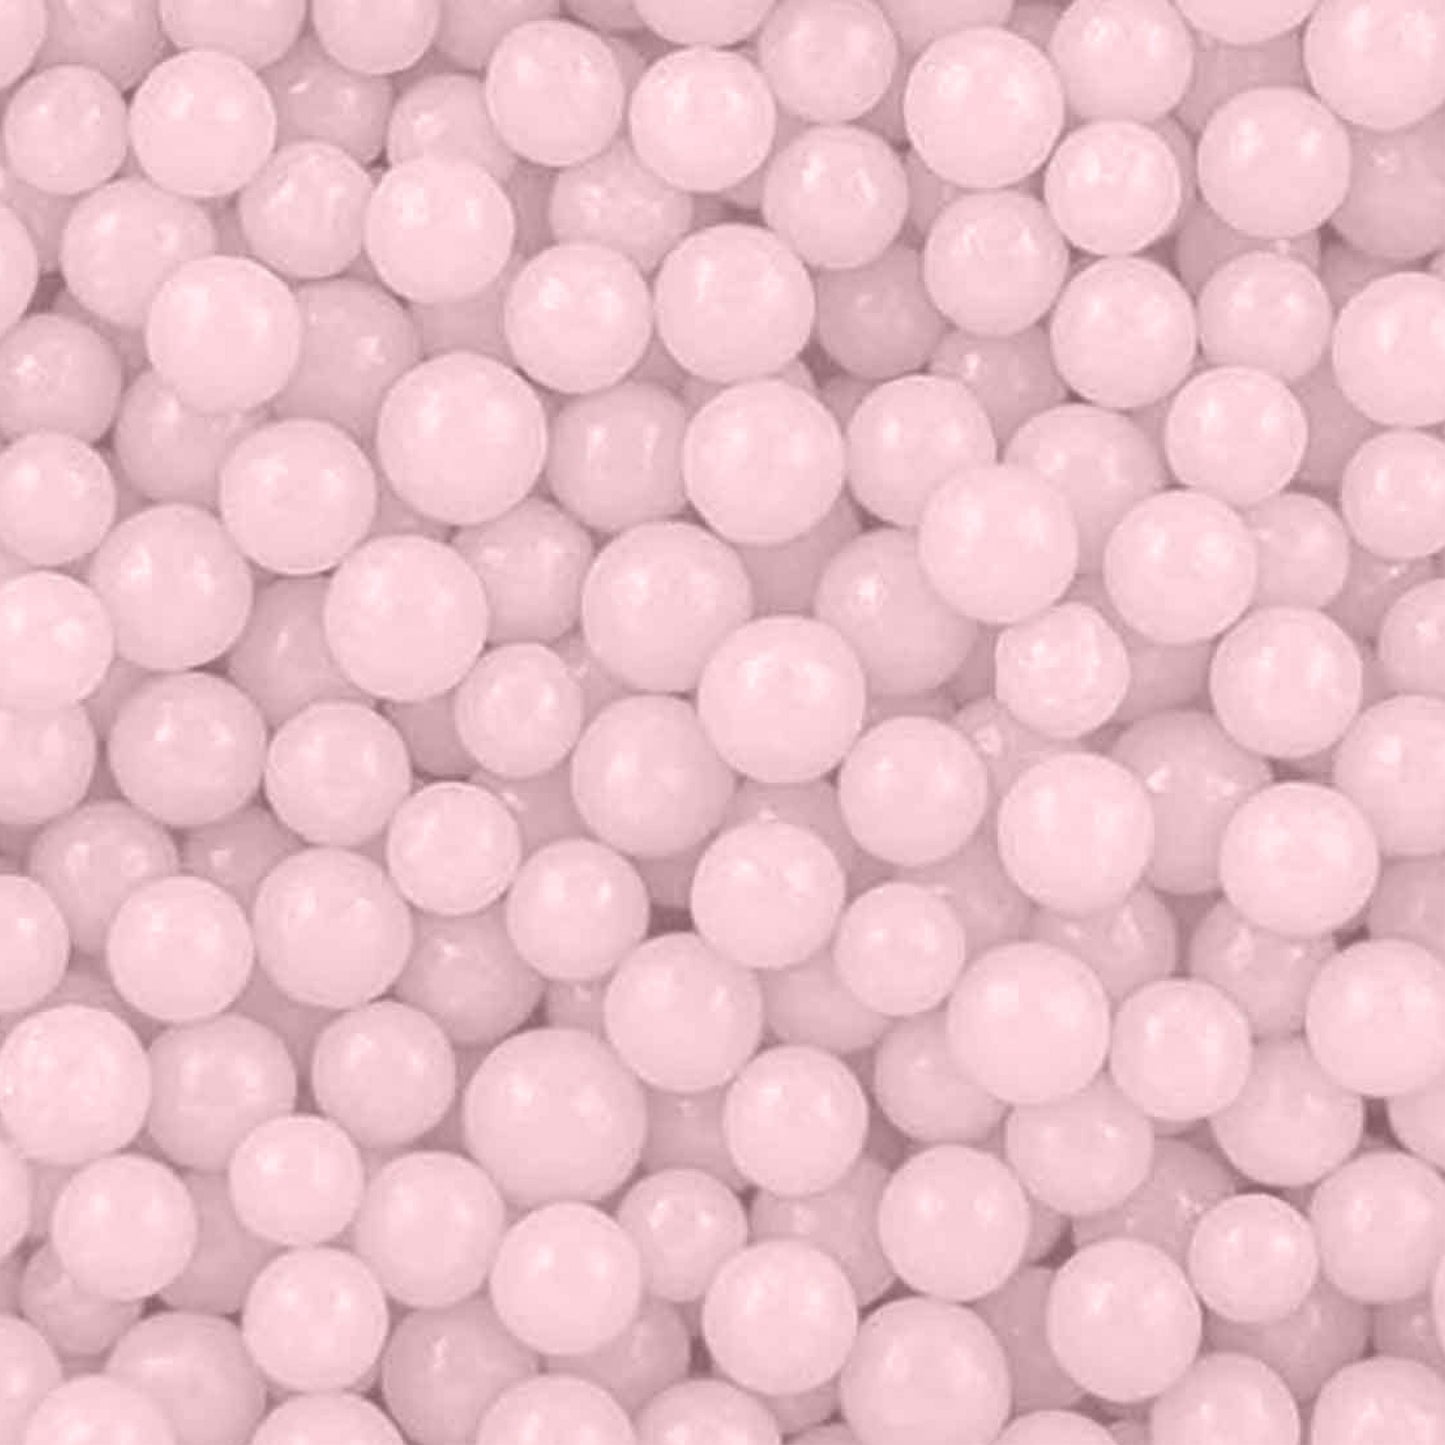 AC Food Crafting Bulk Soft Crunch Pearl Sprinkles 3mm 25lbs-Pearlized Light Pink